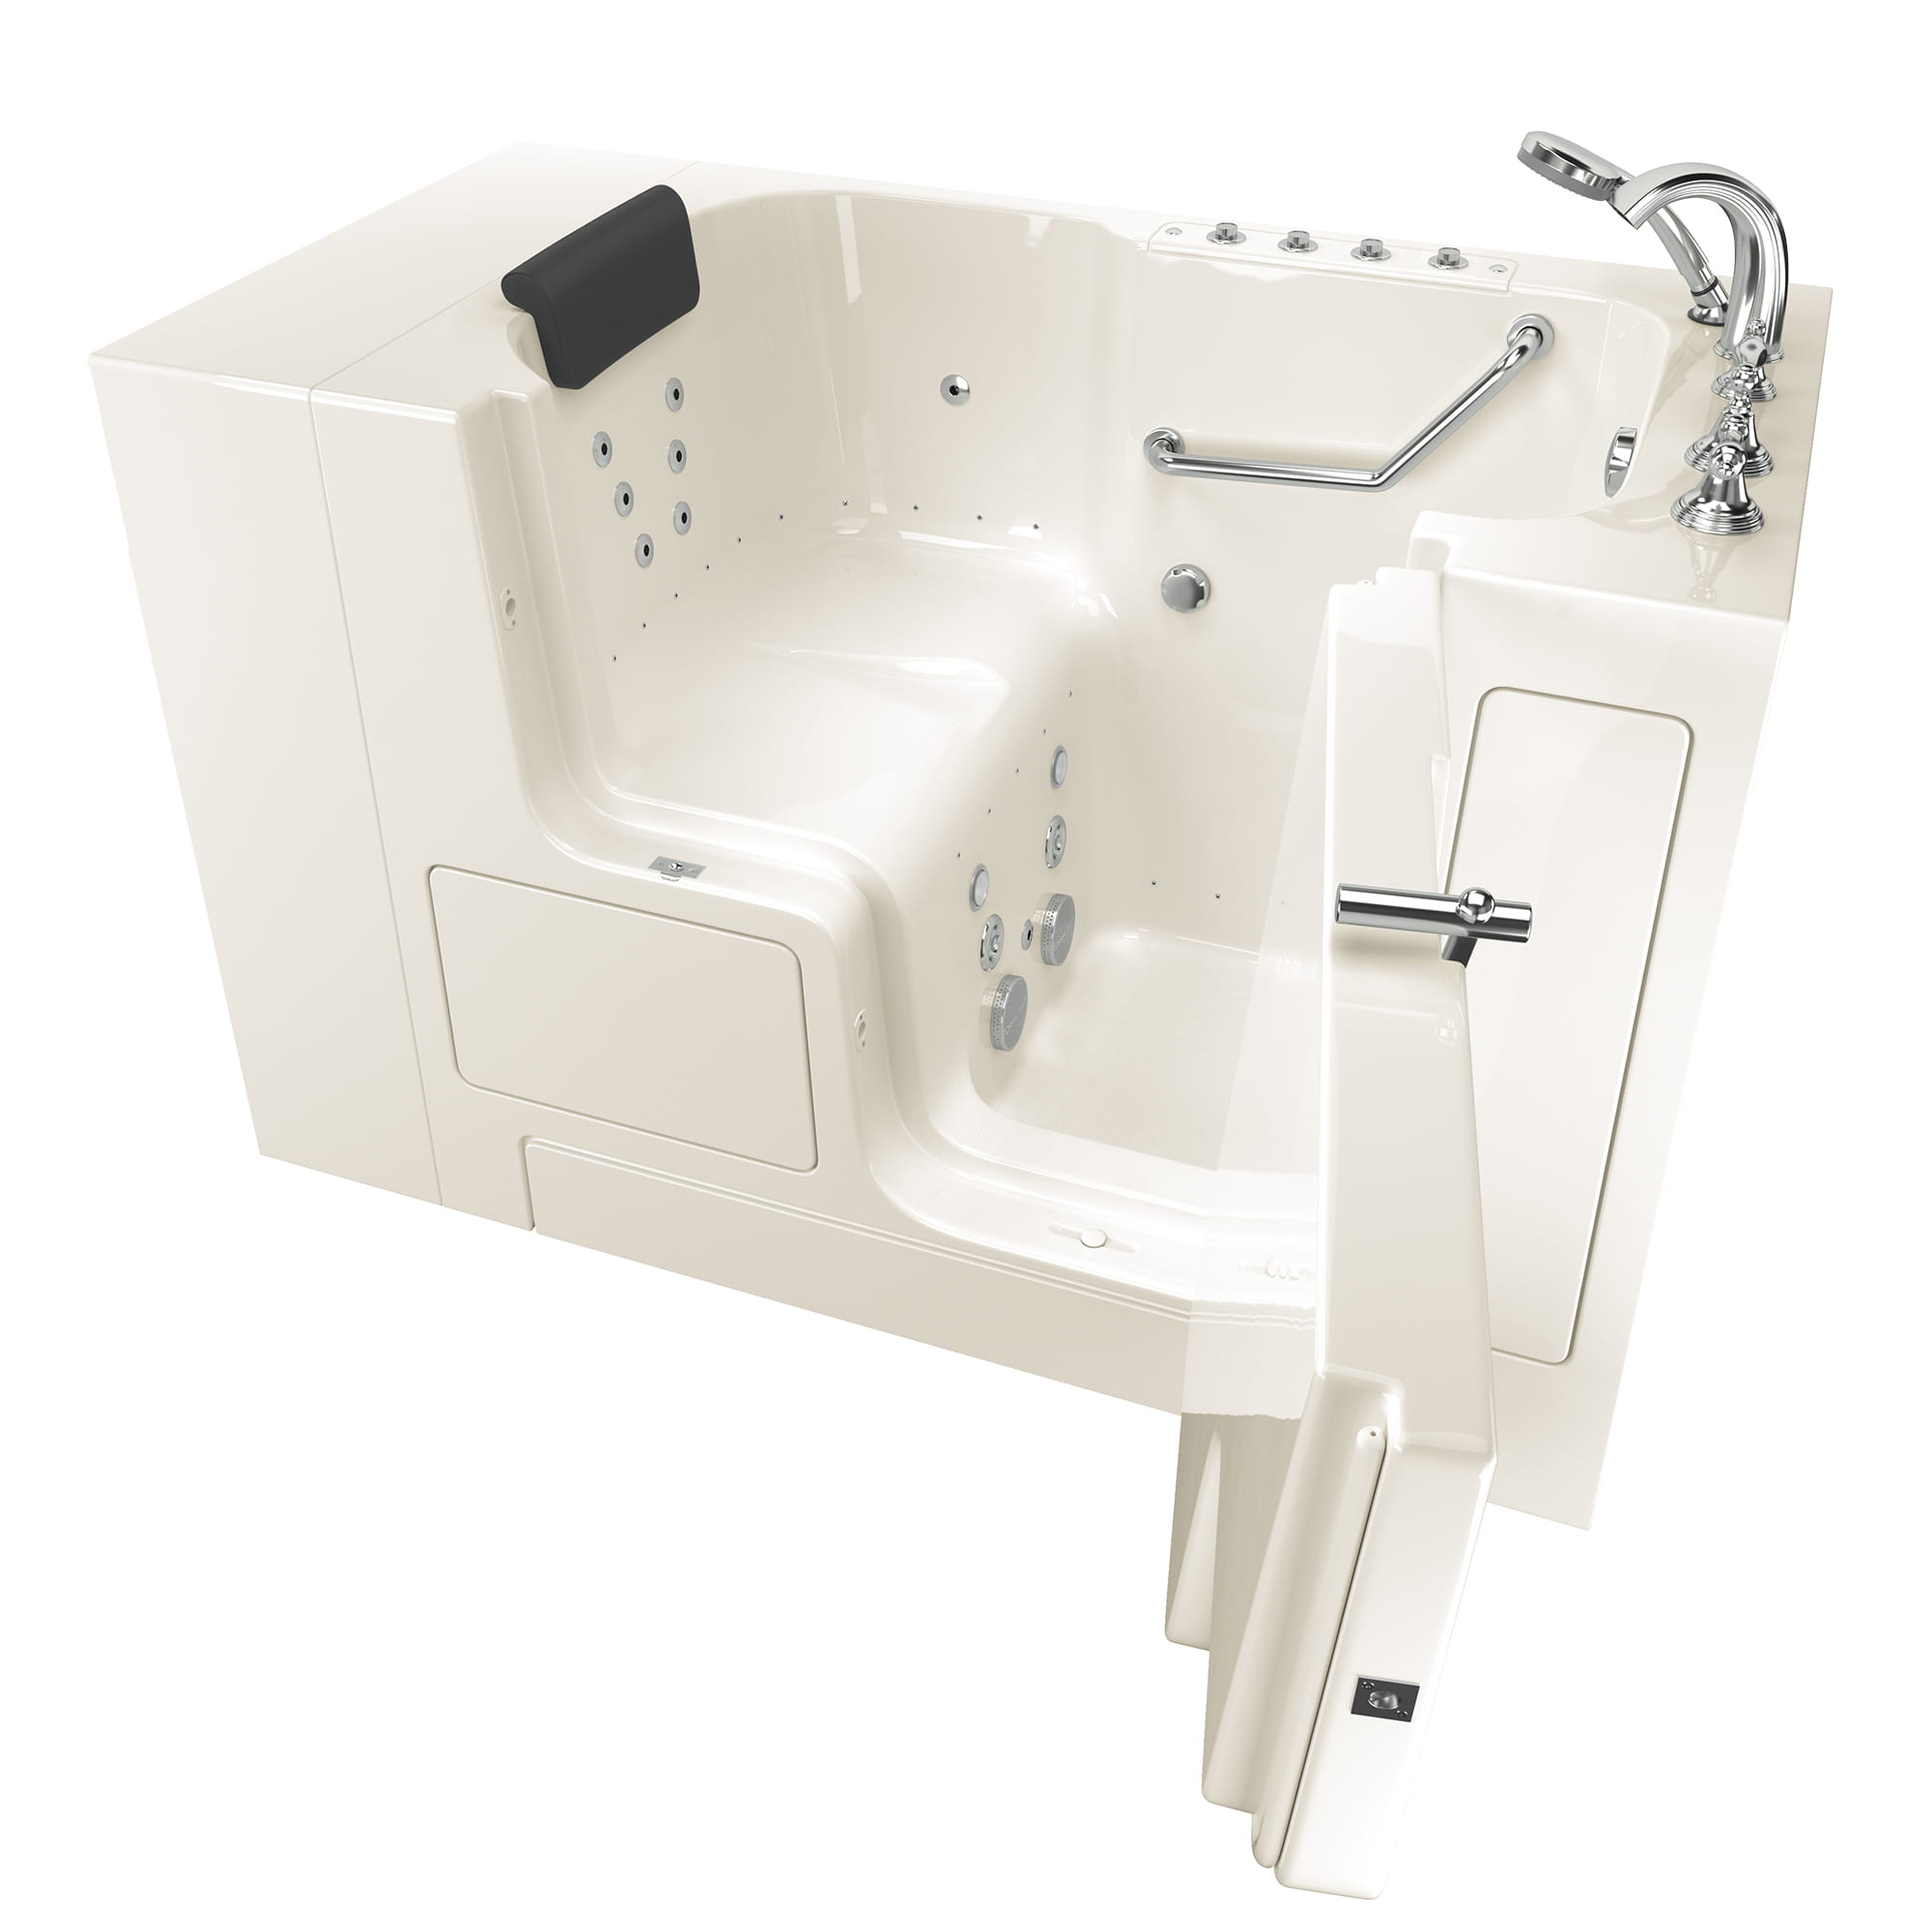 Gelcoat Premium Series 32 x 52 -Inch Walk-in Tub With Combination Air Spa and Whirlpool Systems - Right-Hand Drain With Faucet